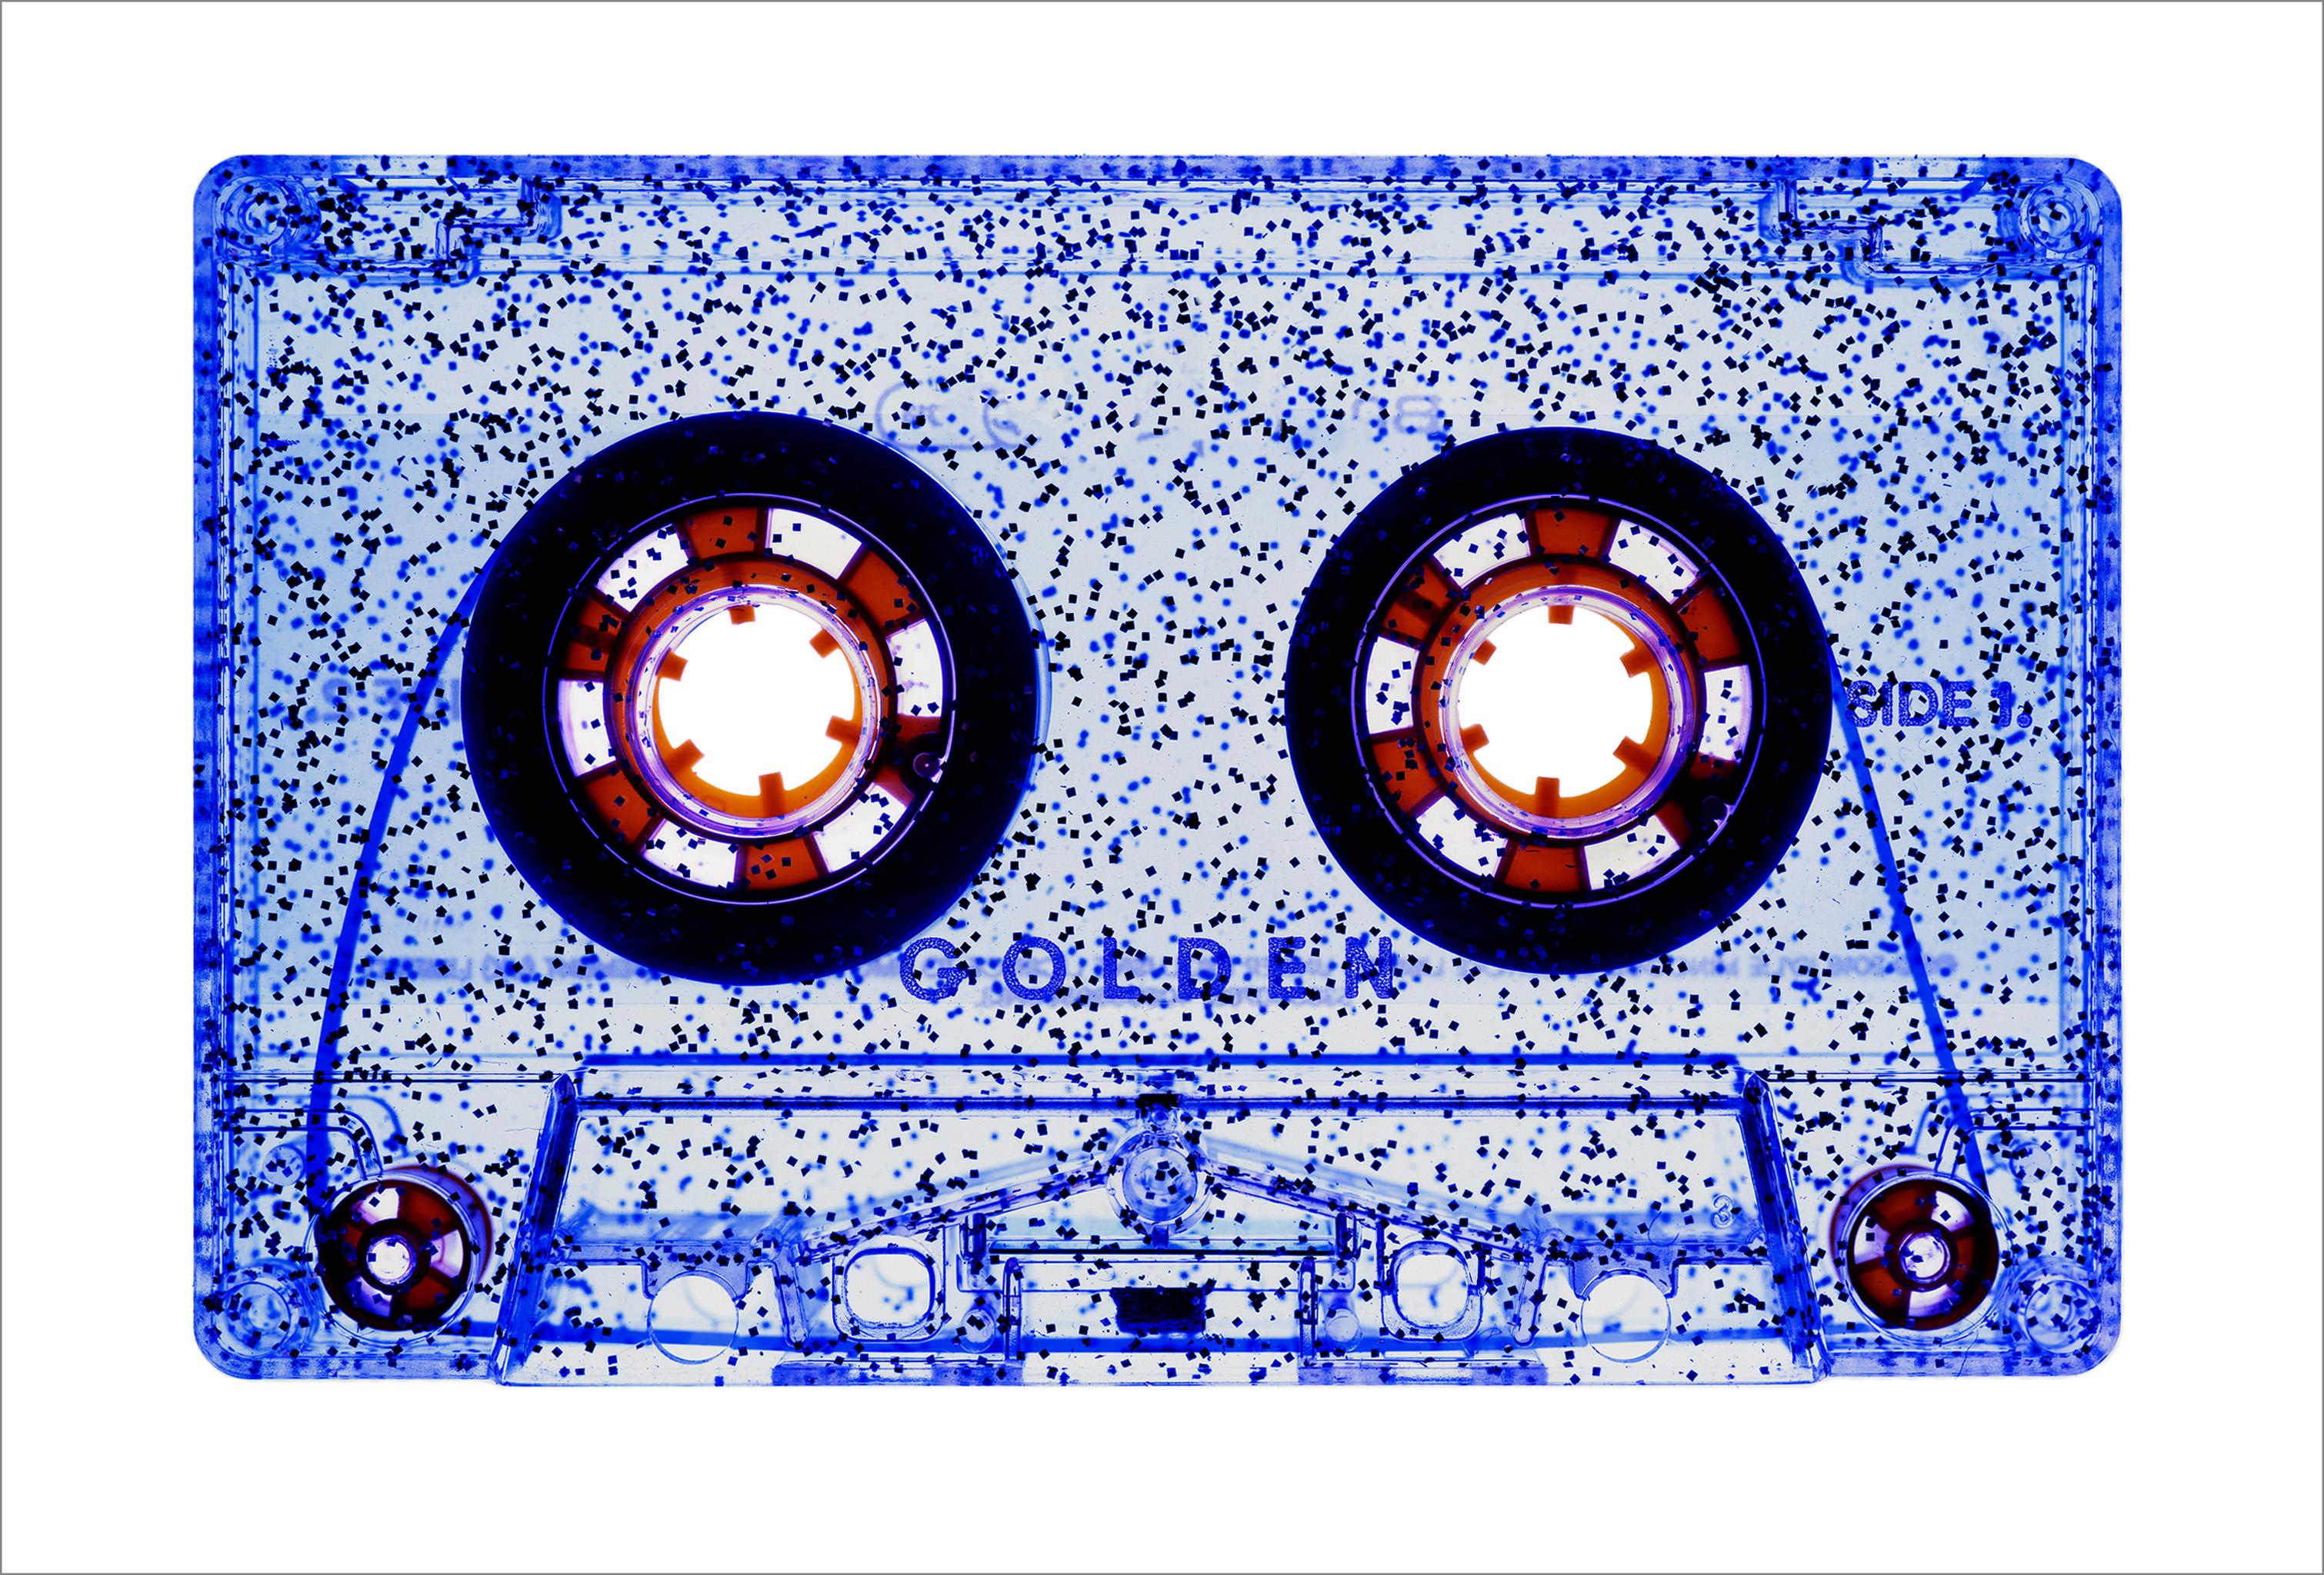 Heidler & Heeps Print - Tape Collection, All That Glitters is Not Golden (Blue) - Pop Art Photography